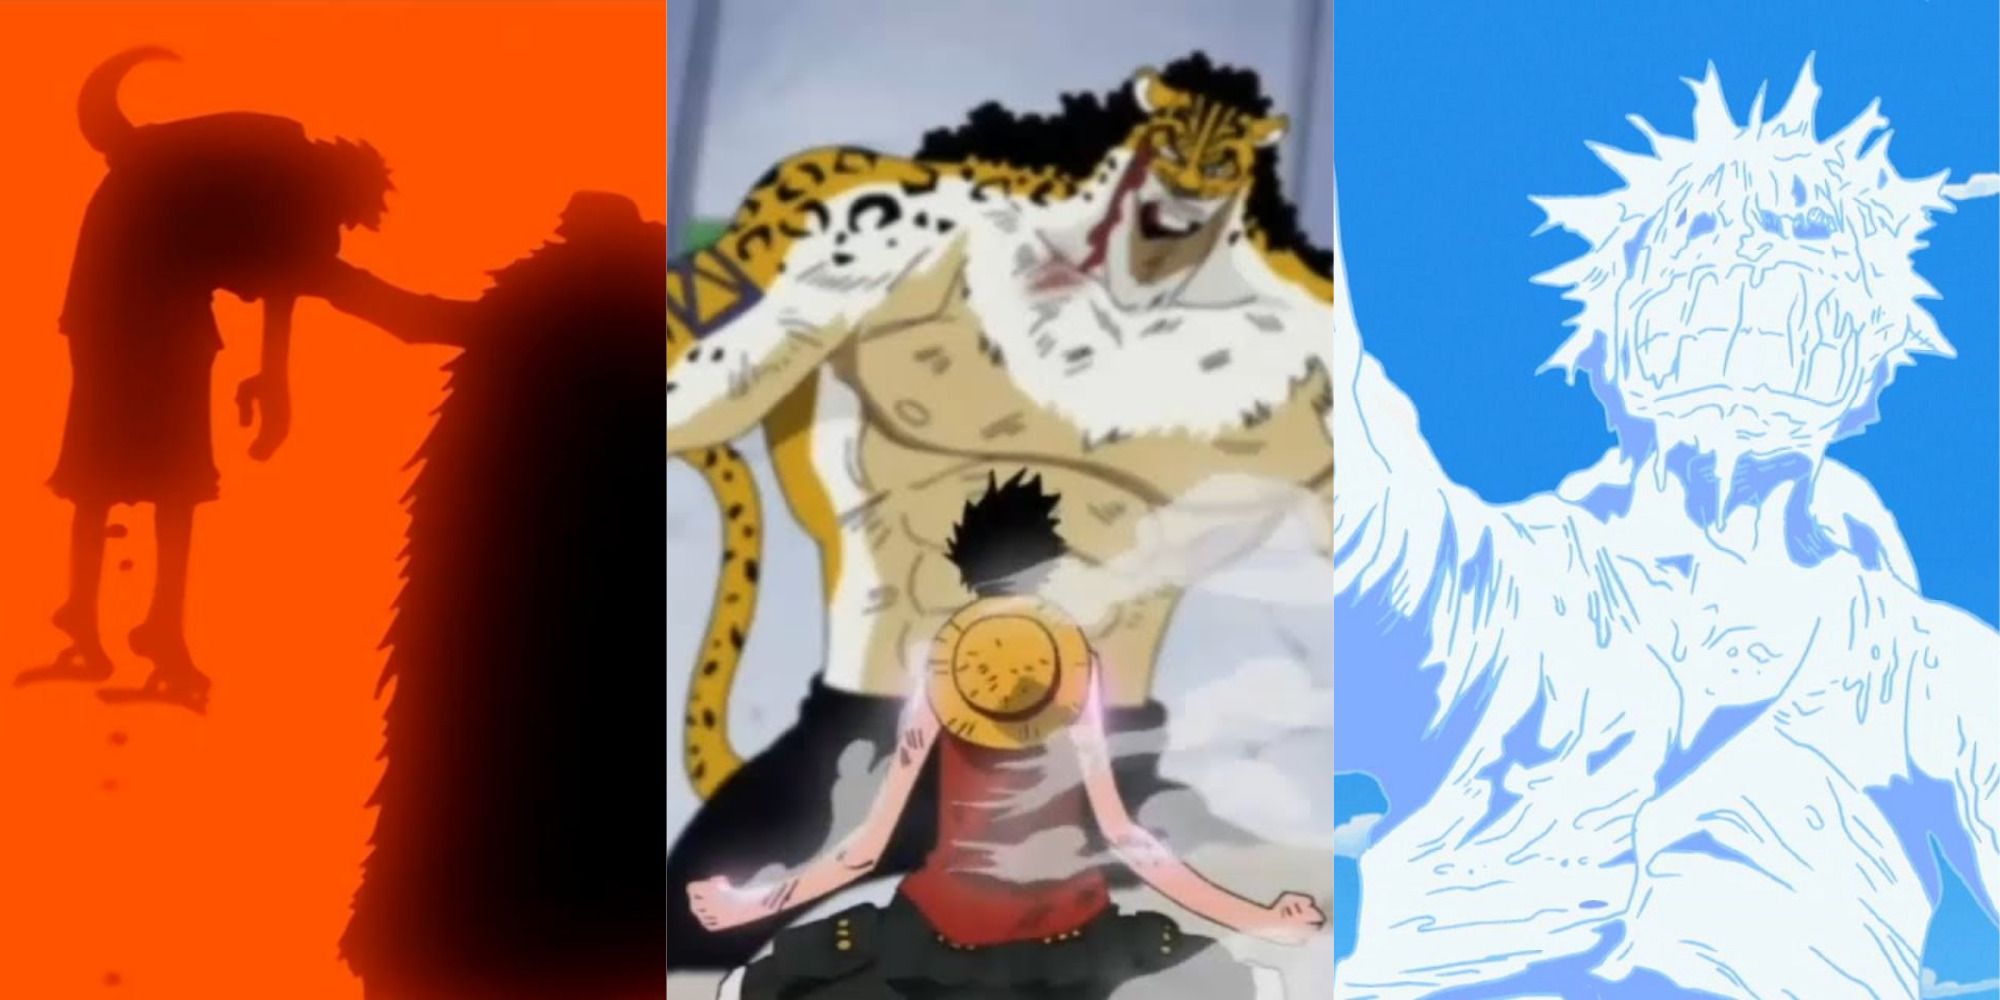 One Piece: Will Luffy die at the end?